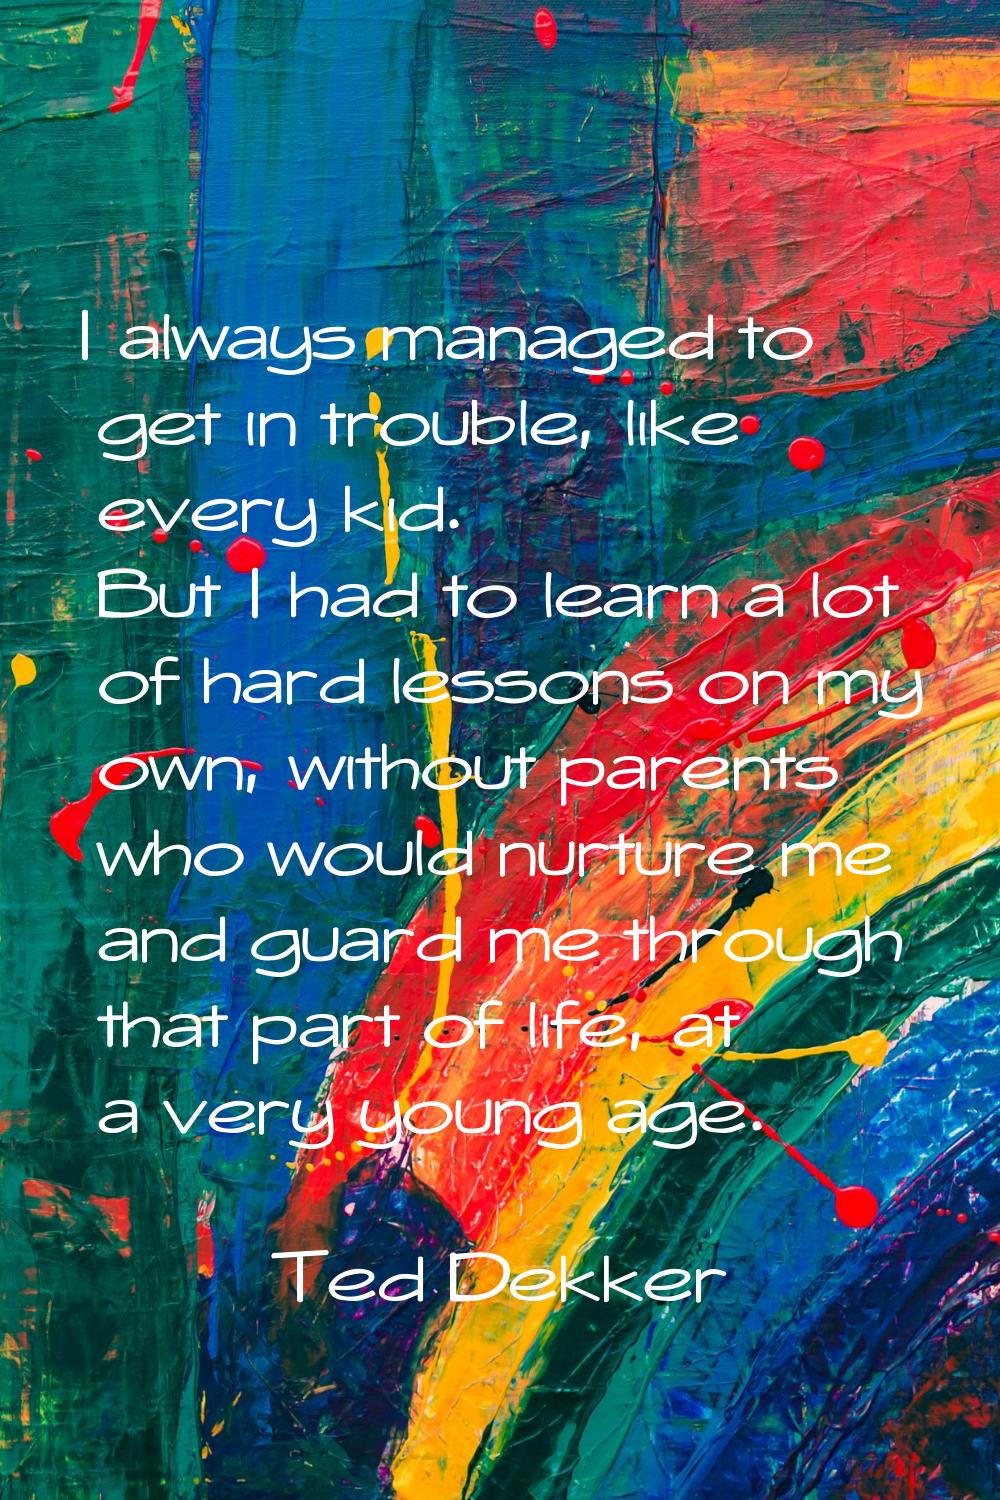 I always managed to get in trouble, like every kid. But I had to learn a lot of hard lessons on my 